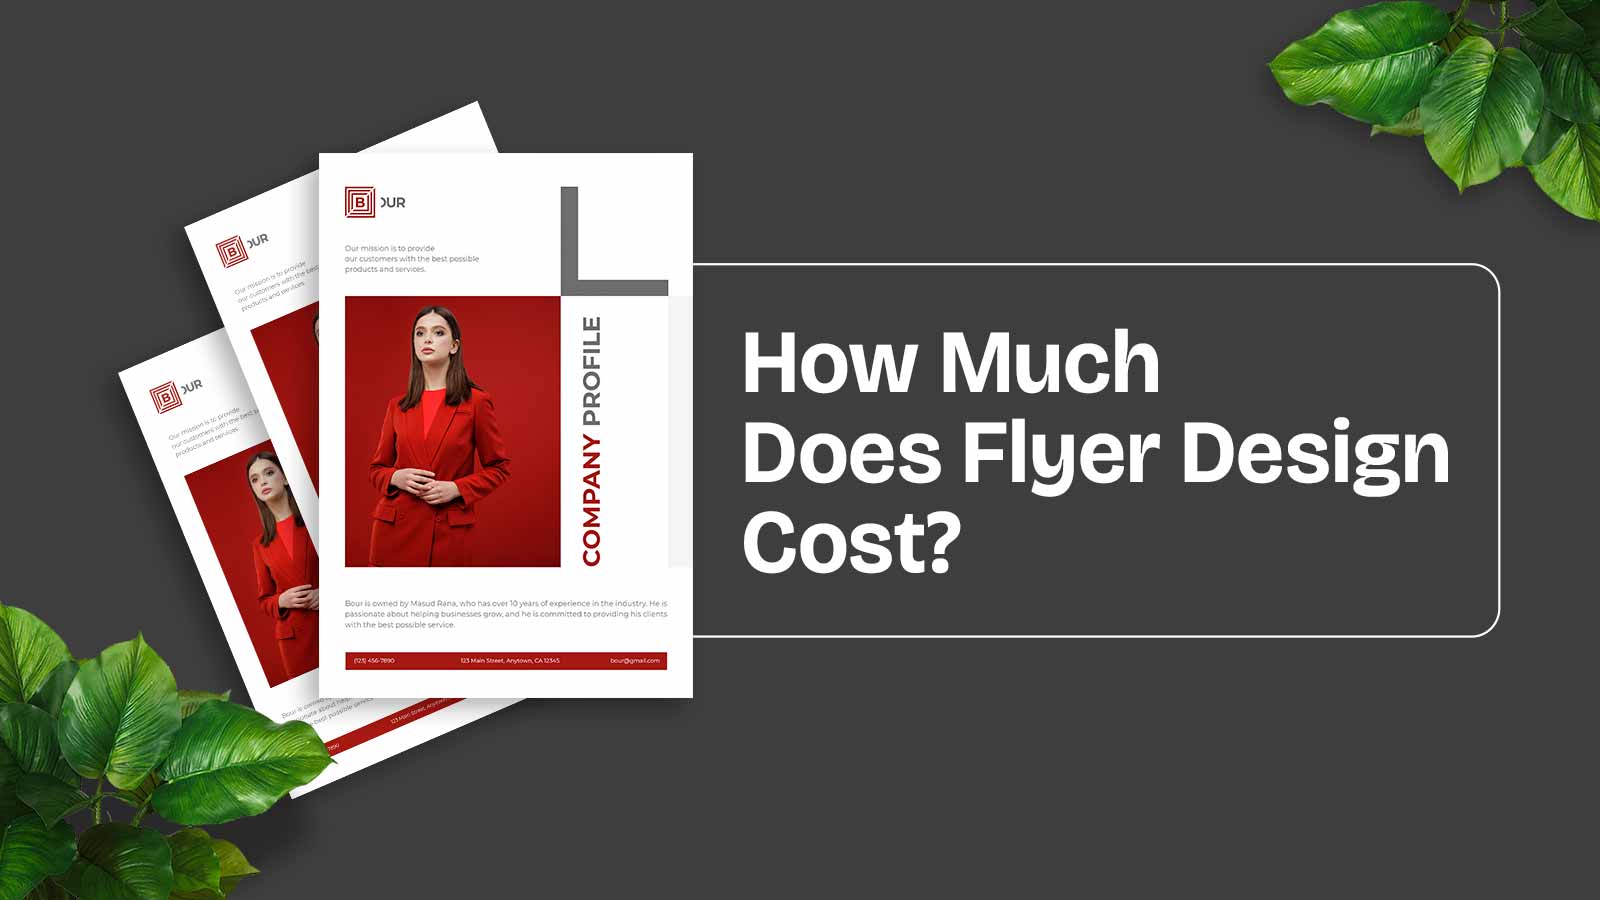 How Much Does Flyer Design Cost?